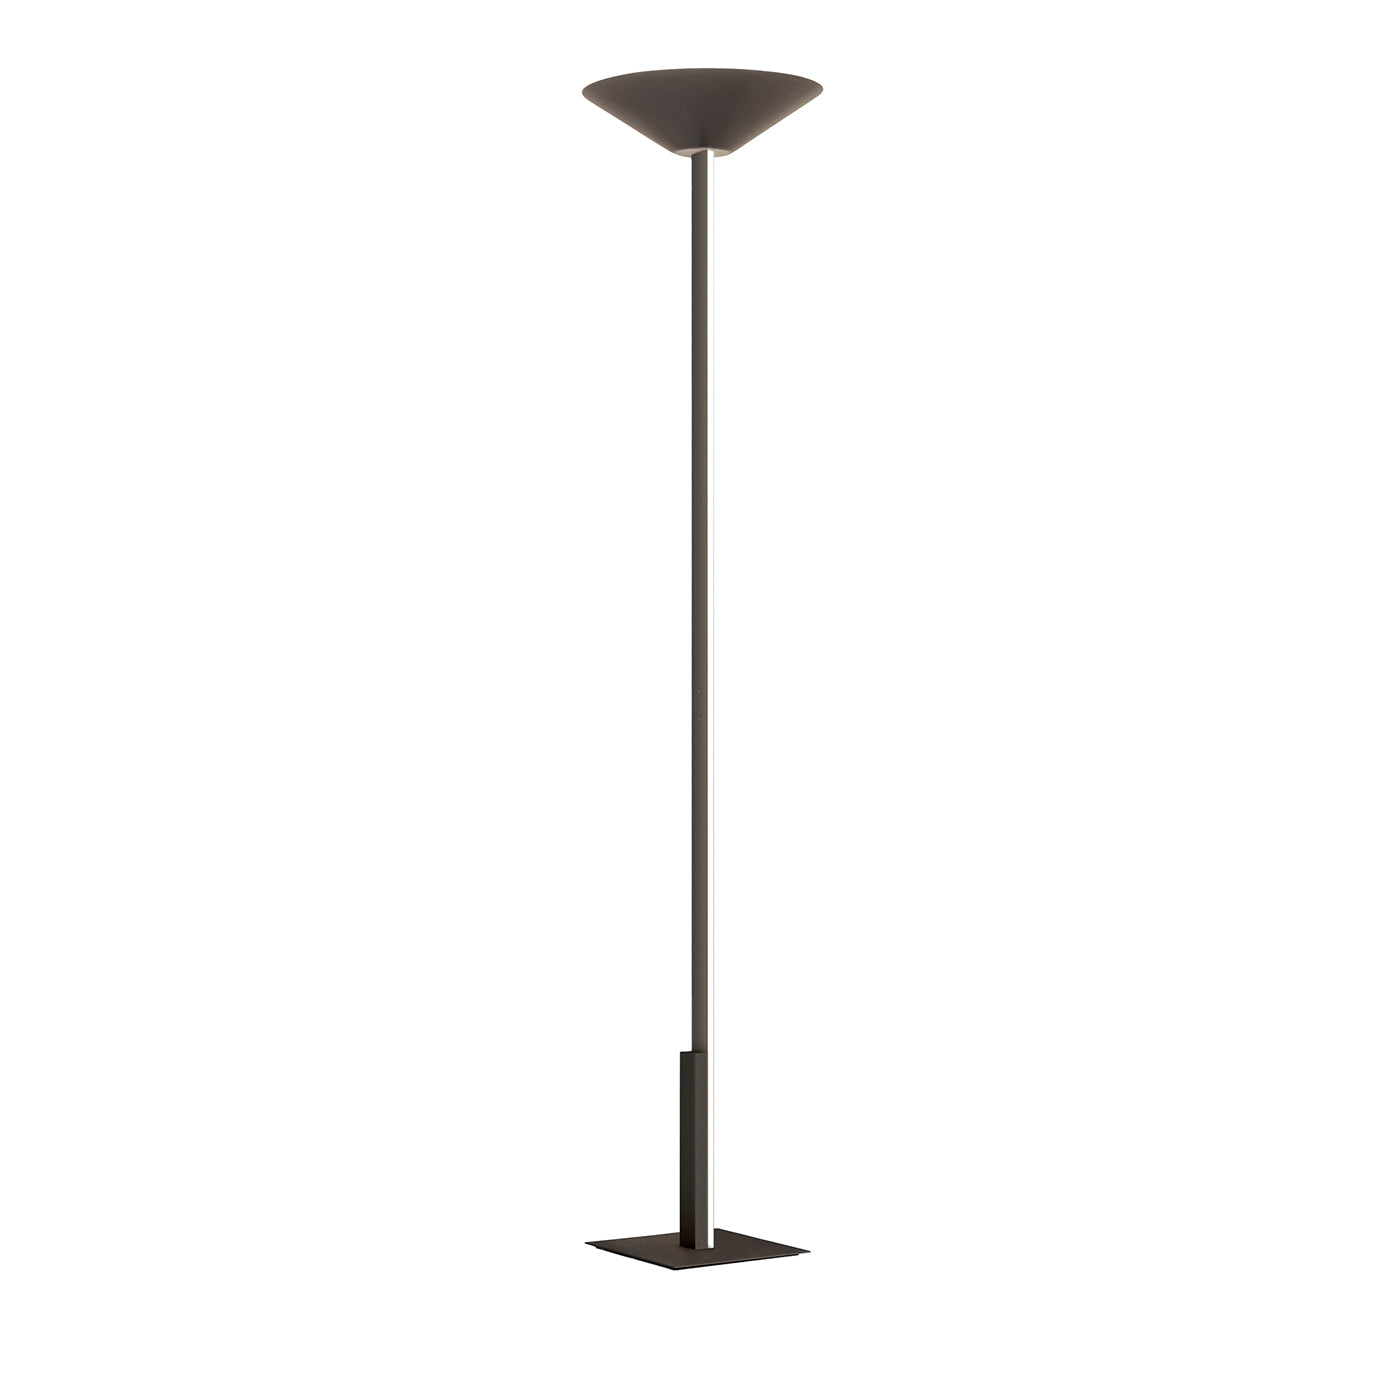 Fly Torch Bronzed Floor Lamp by Massimiliano Raggi - Main view